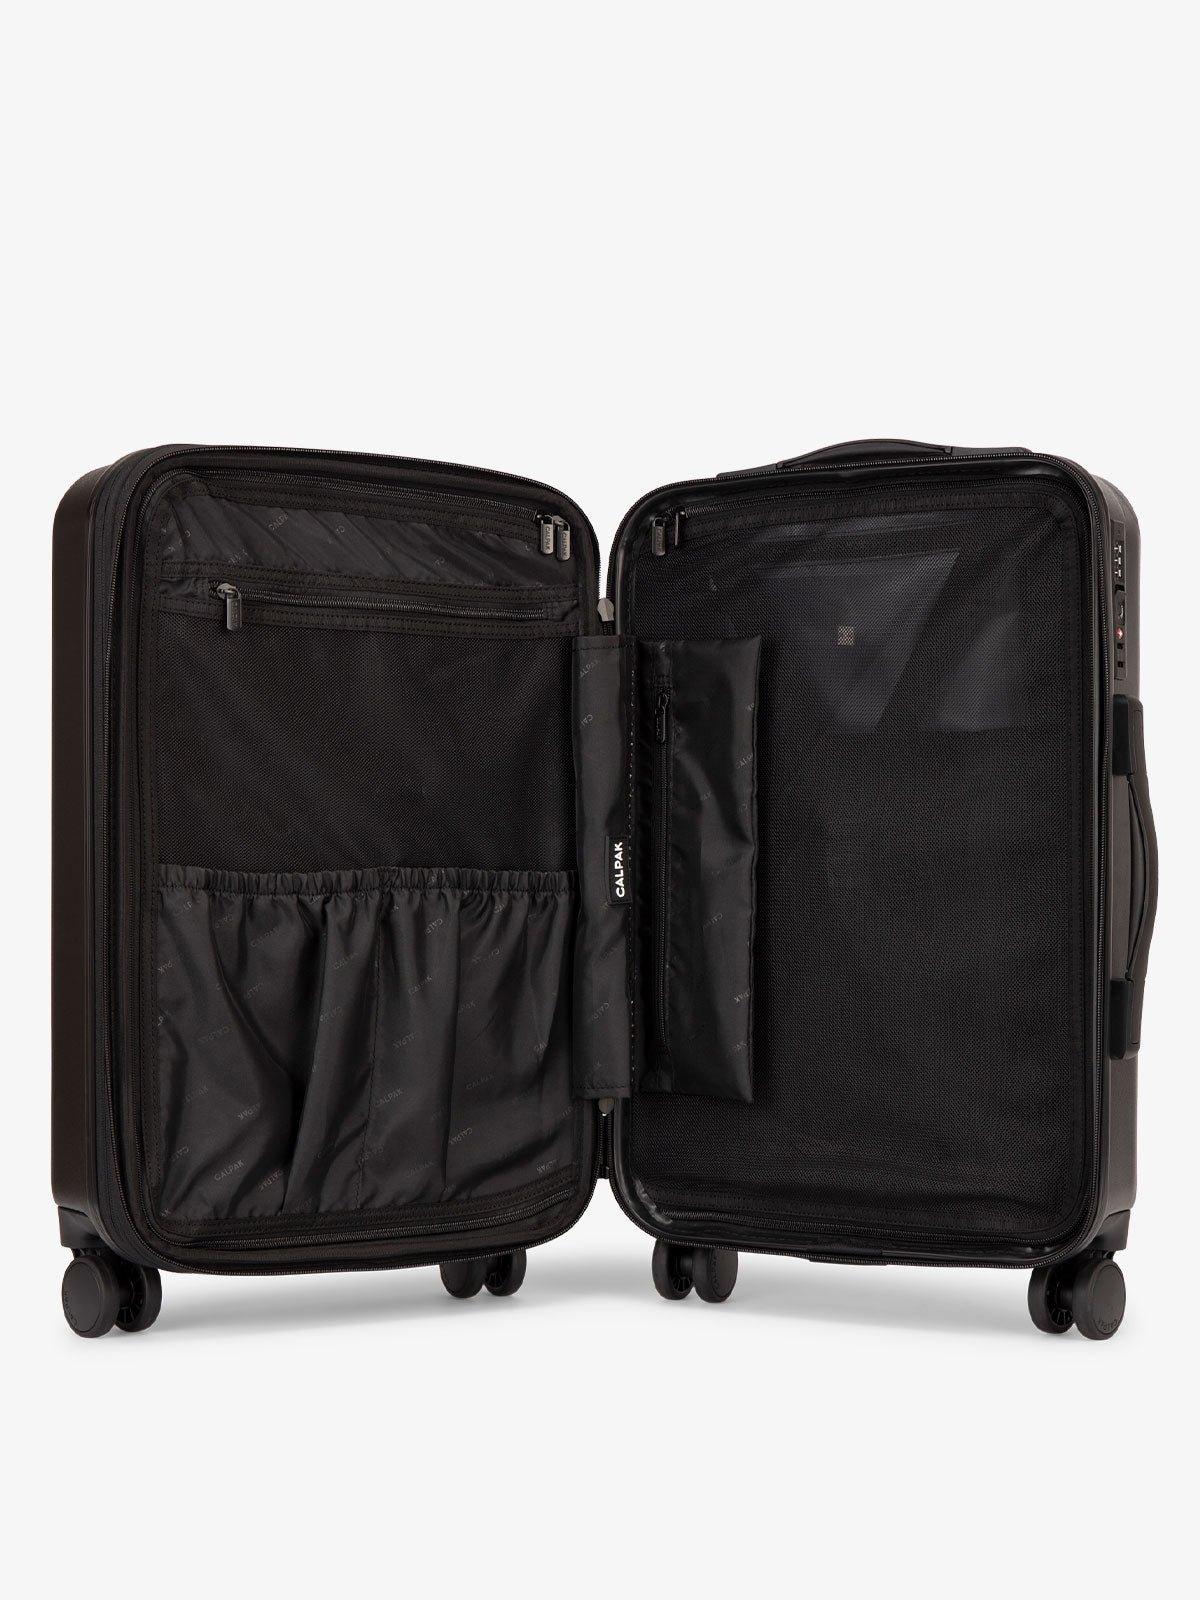 CALPAK Evry Carry-On Luggage features divided compartments with interior pockets for organized packing in black